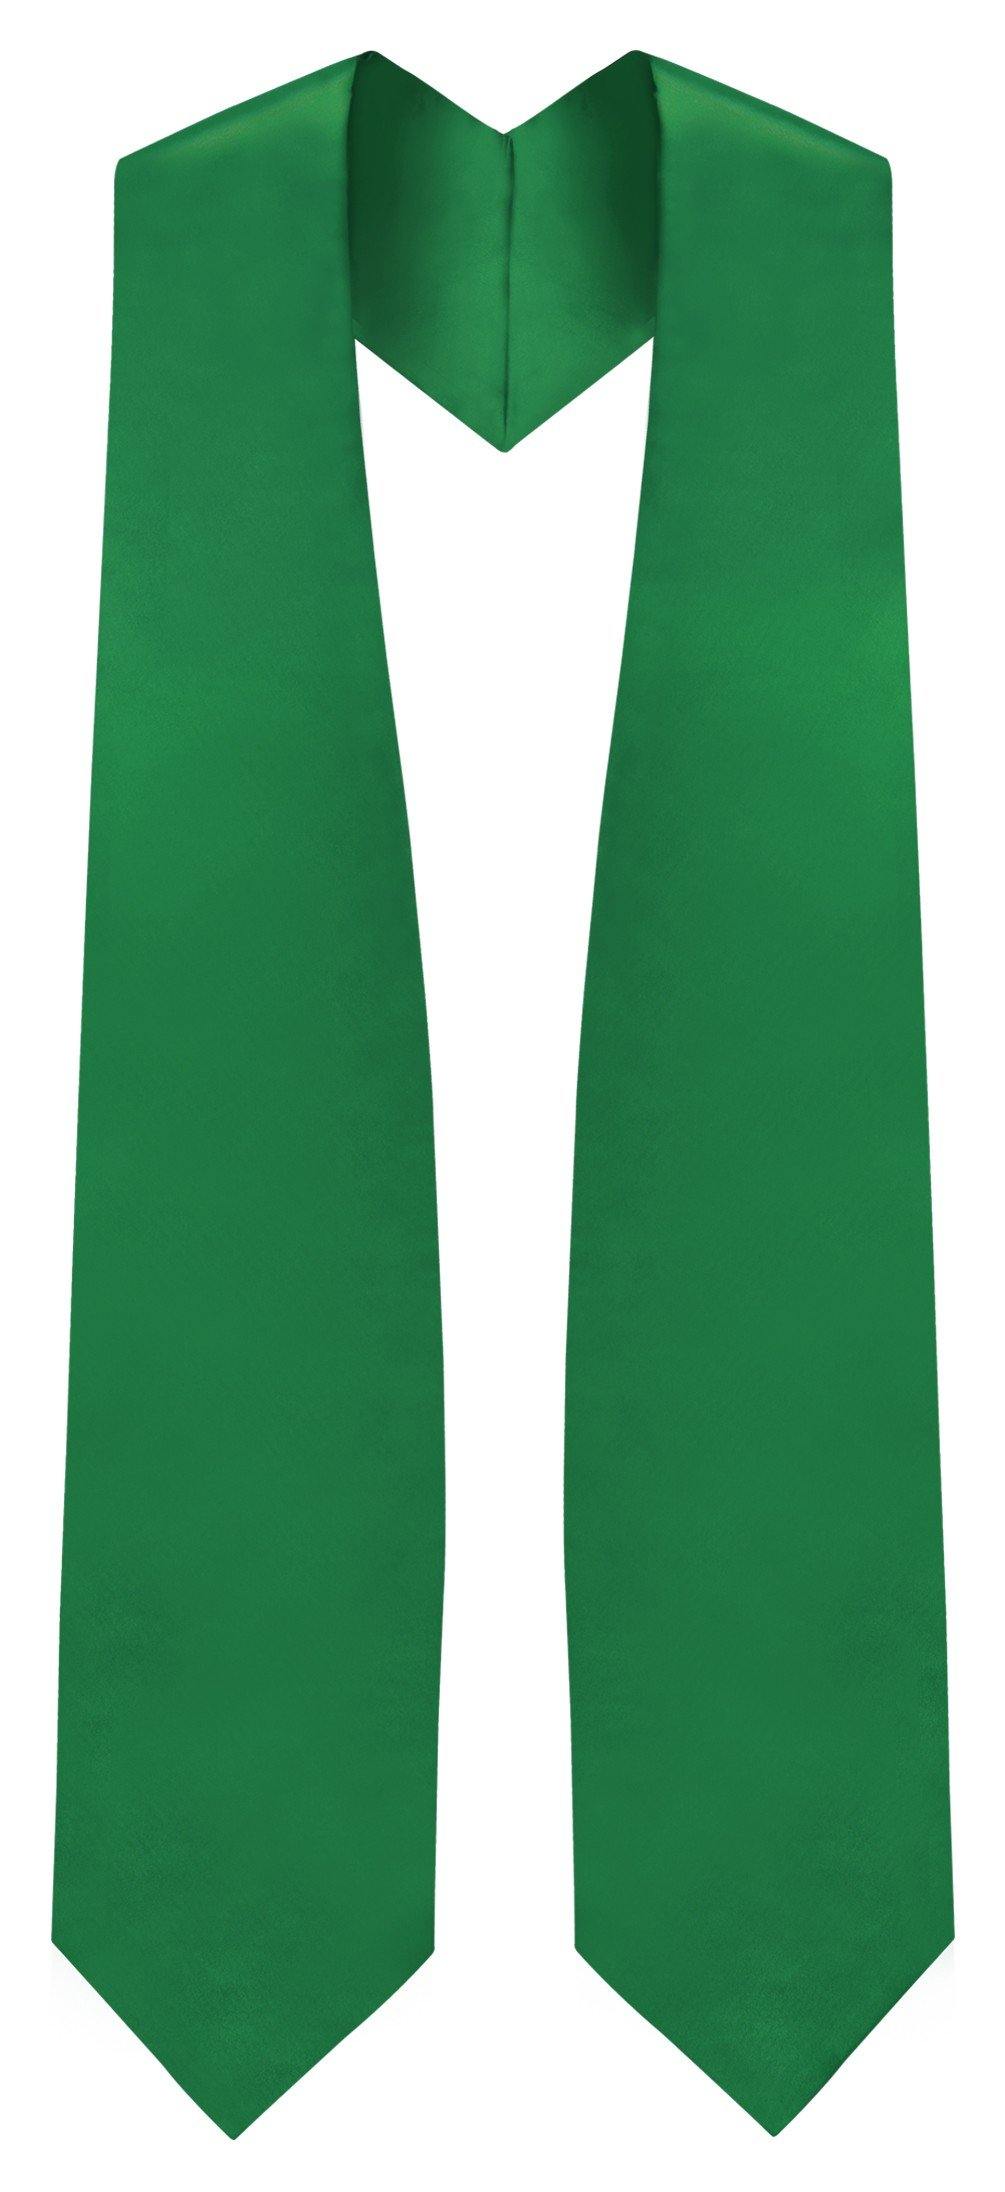 Green Graduation Stole - Green College & High School Stoles - Graduation Cap and Gown